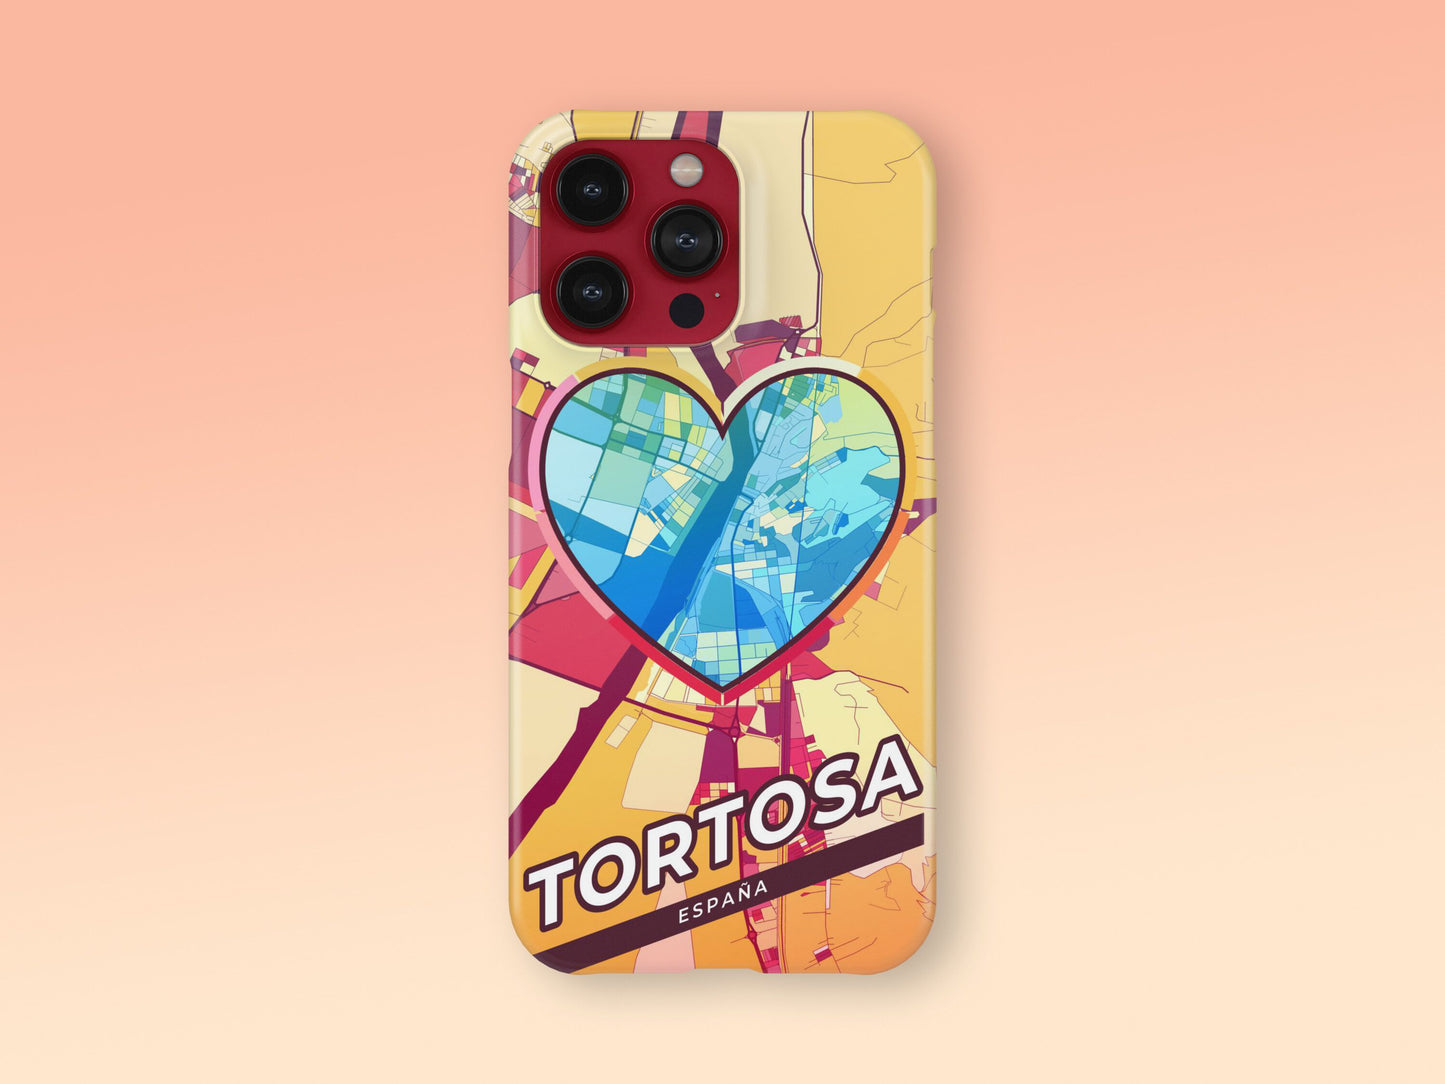 Tortosa Spain slim phone case with colorful icon. Birthday, wedding or housewarming gift. Couple match cases. 2